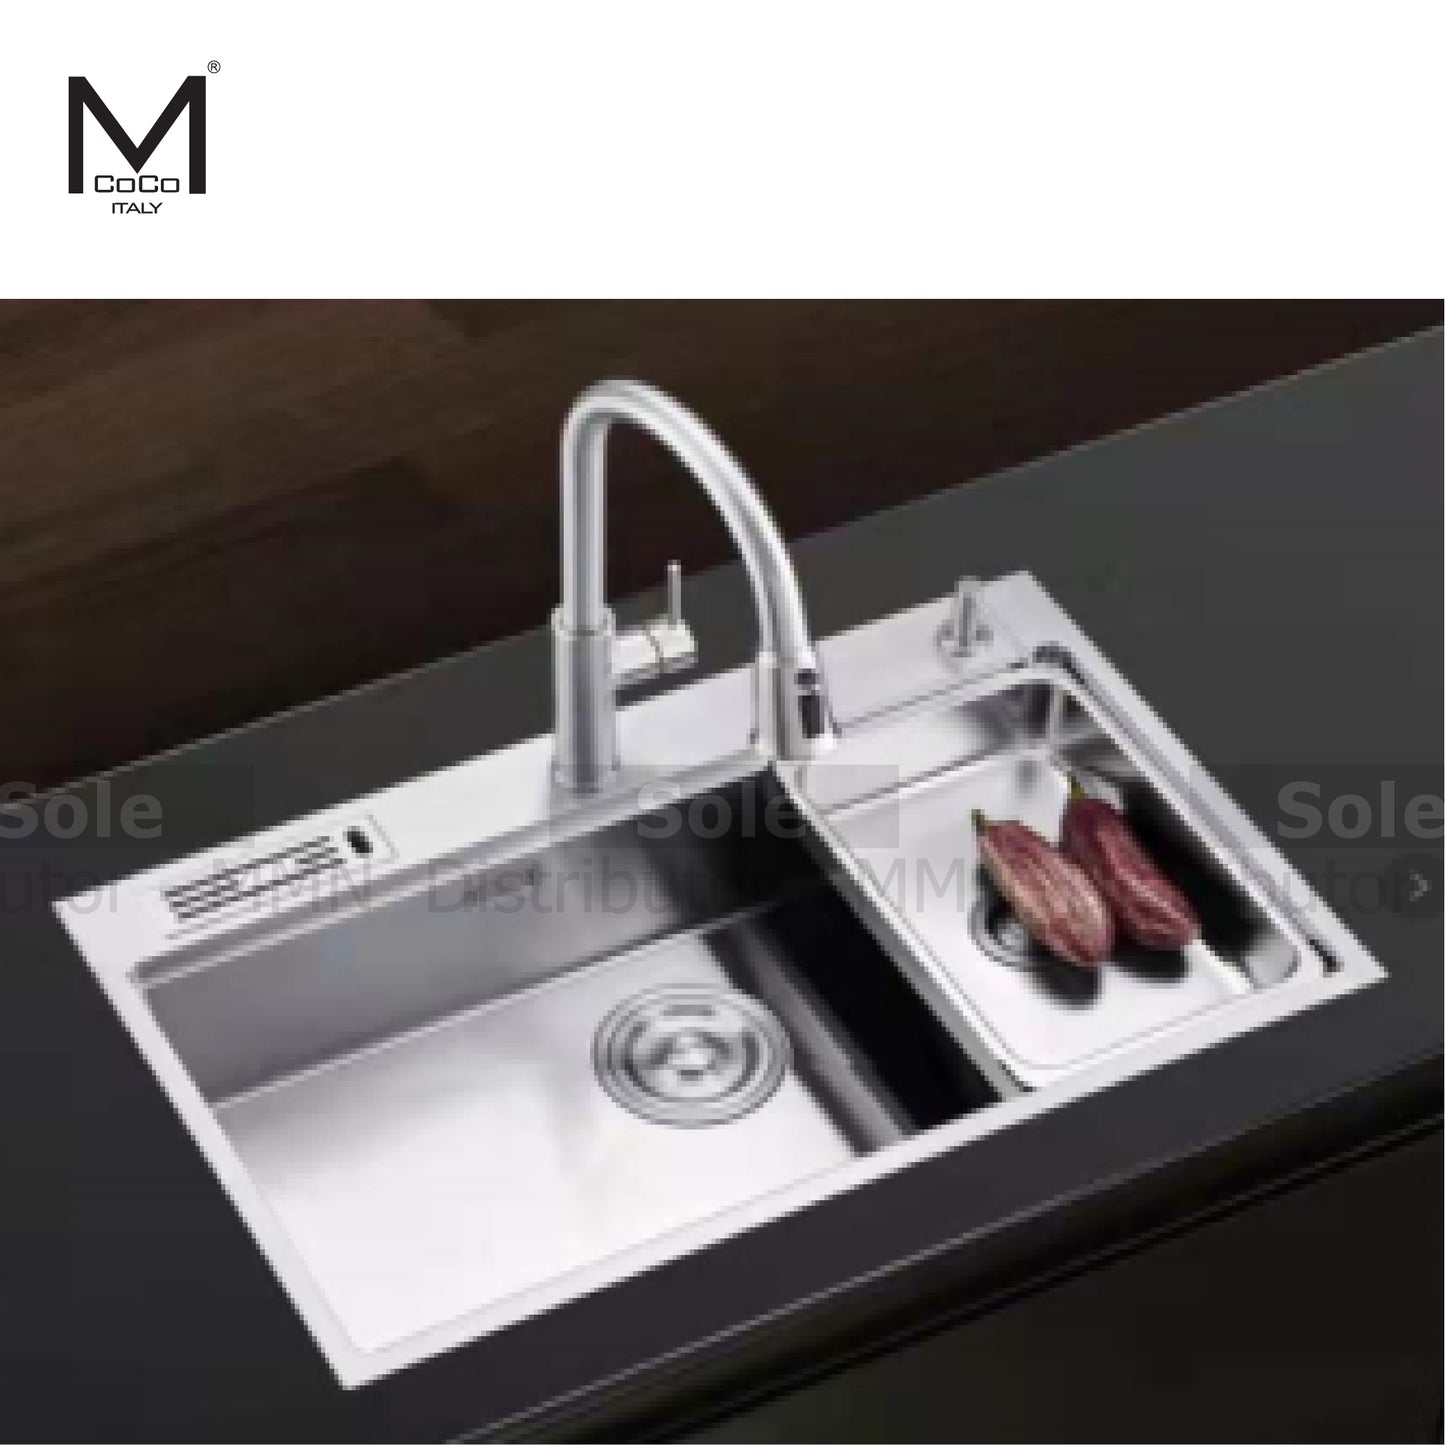 Mcoco Sink Top Mount Single Bowl Dimension 780x460x220mm Stainless Steel Finish - 7846SS